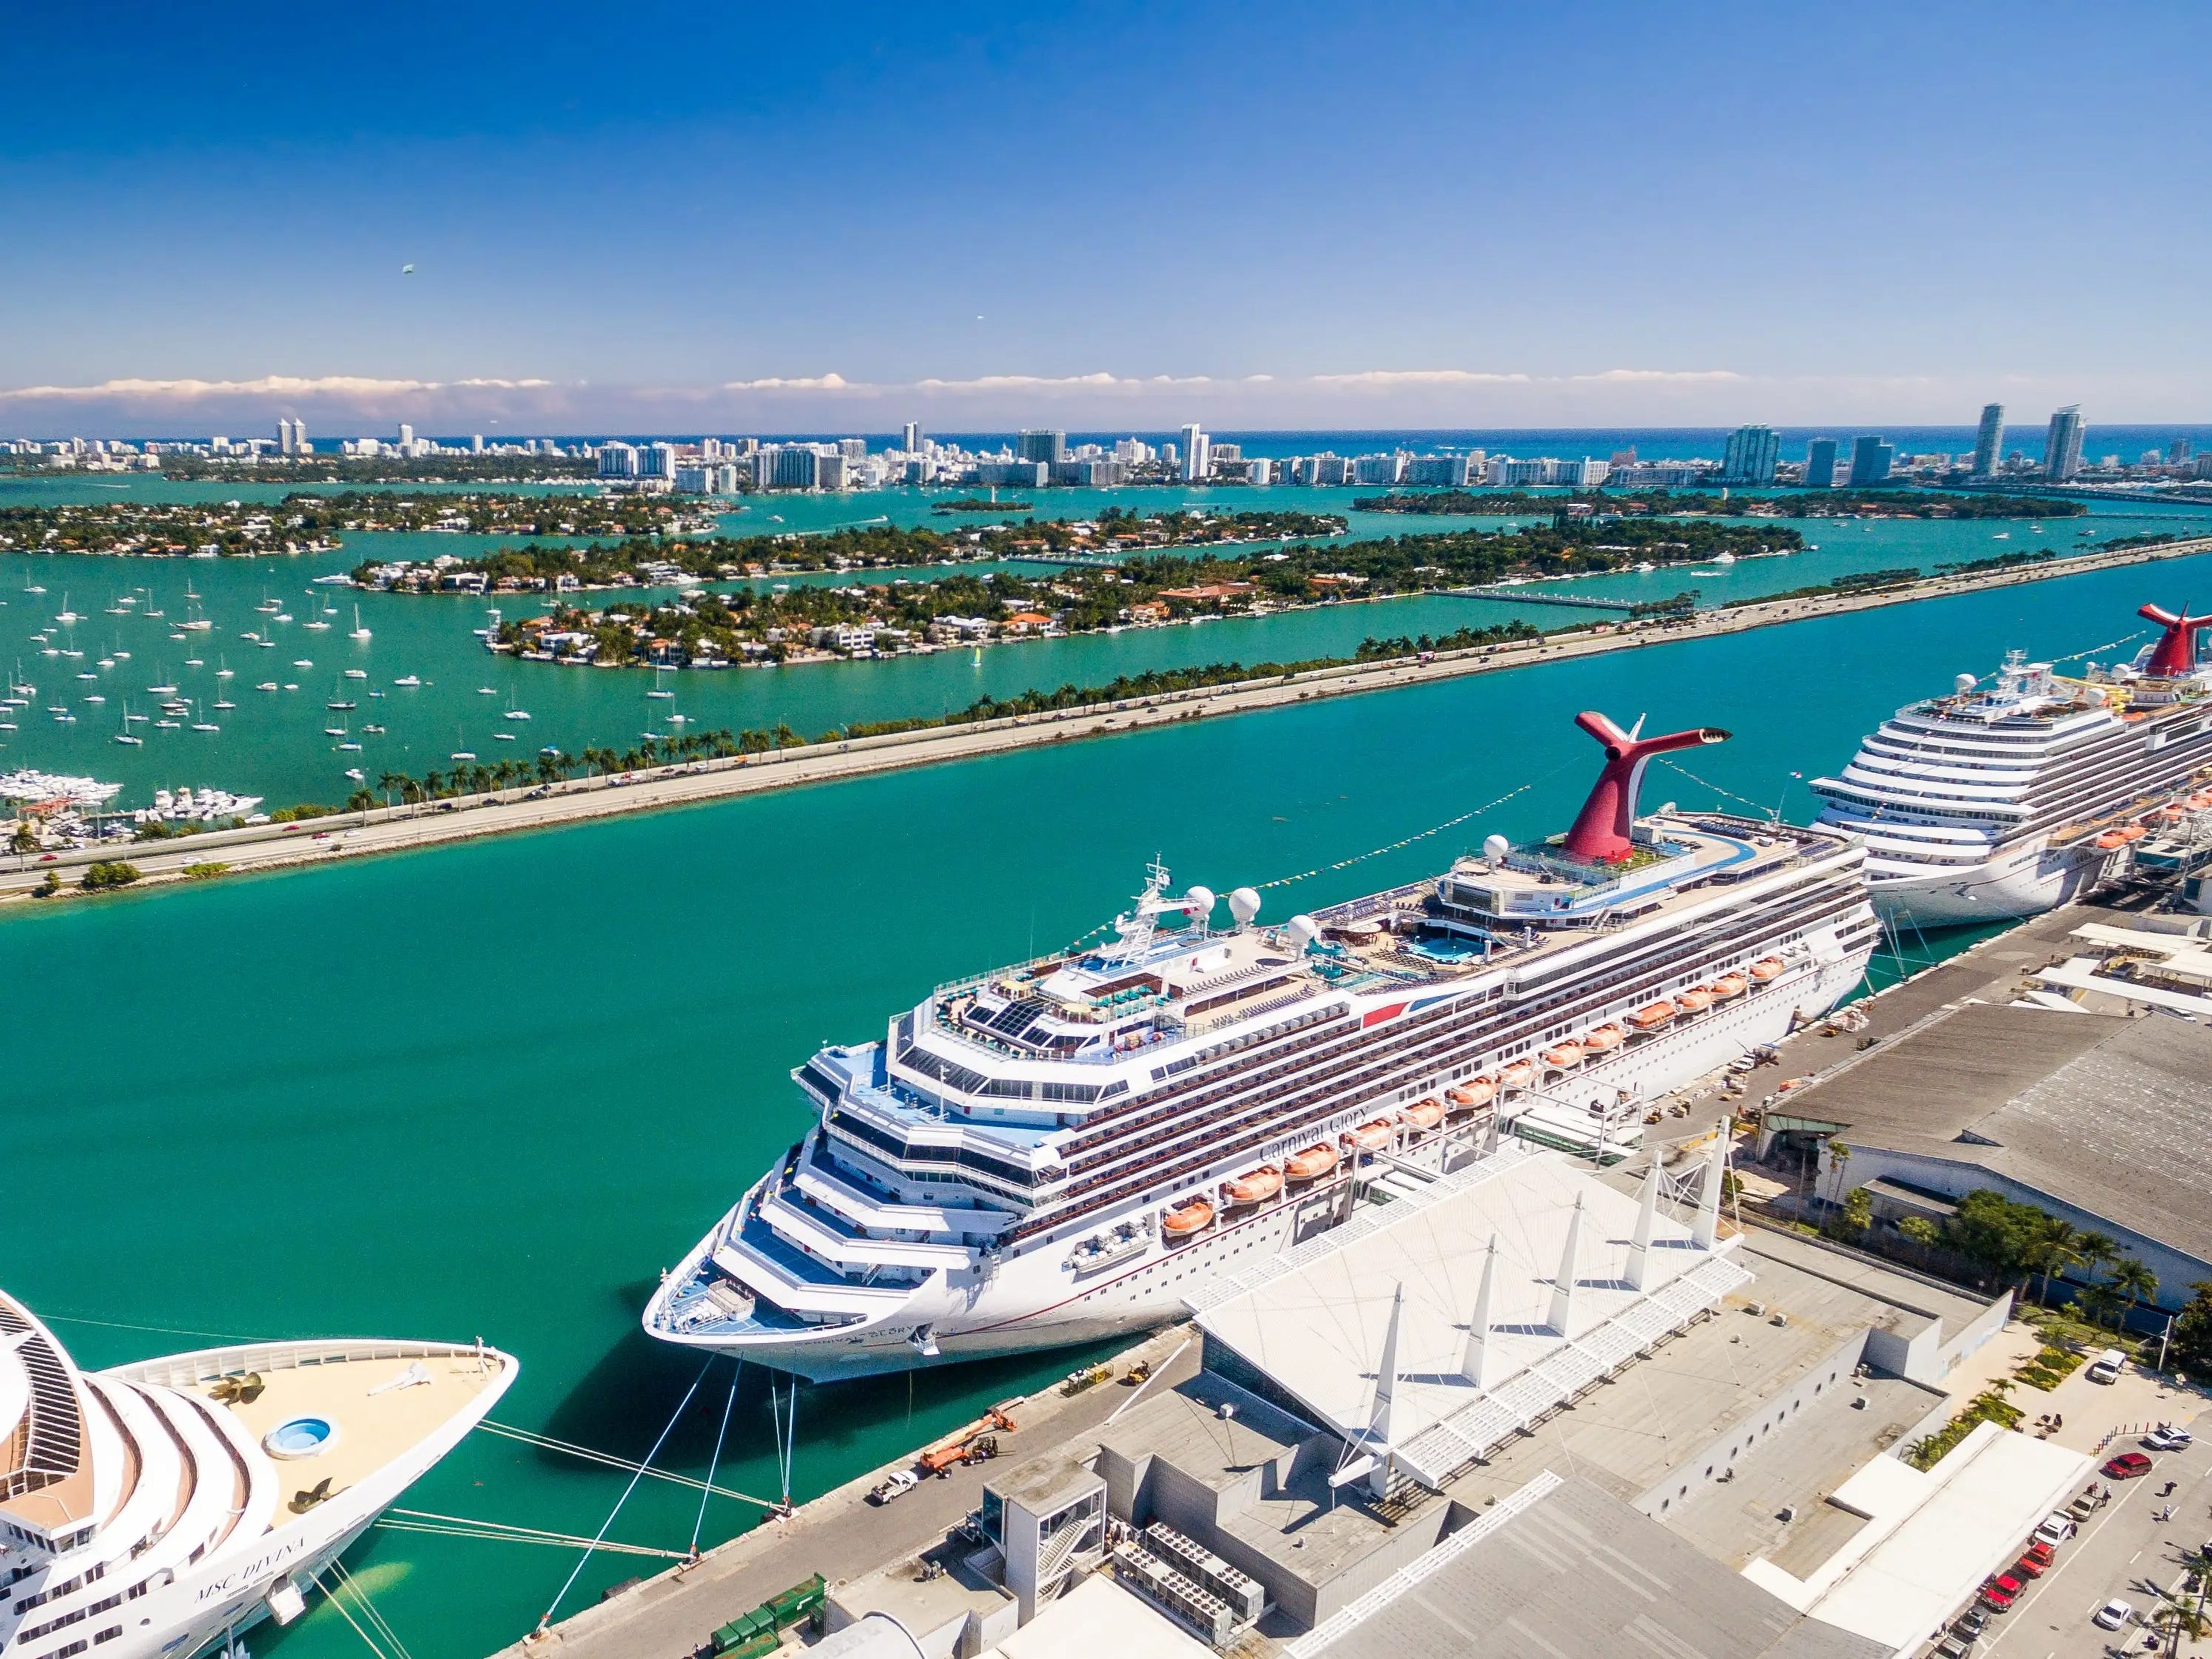 port of miami with cruise ships docked in blue-green waters